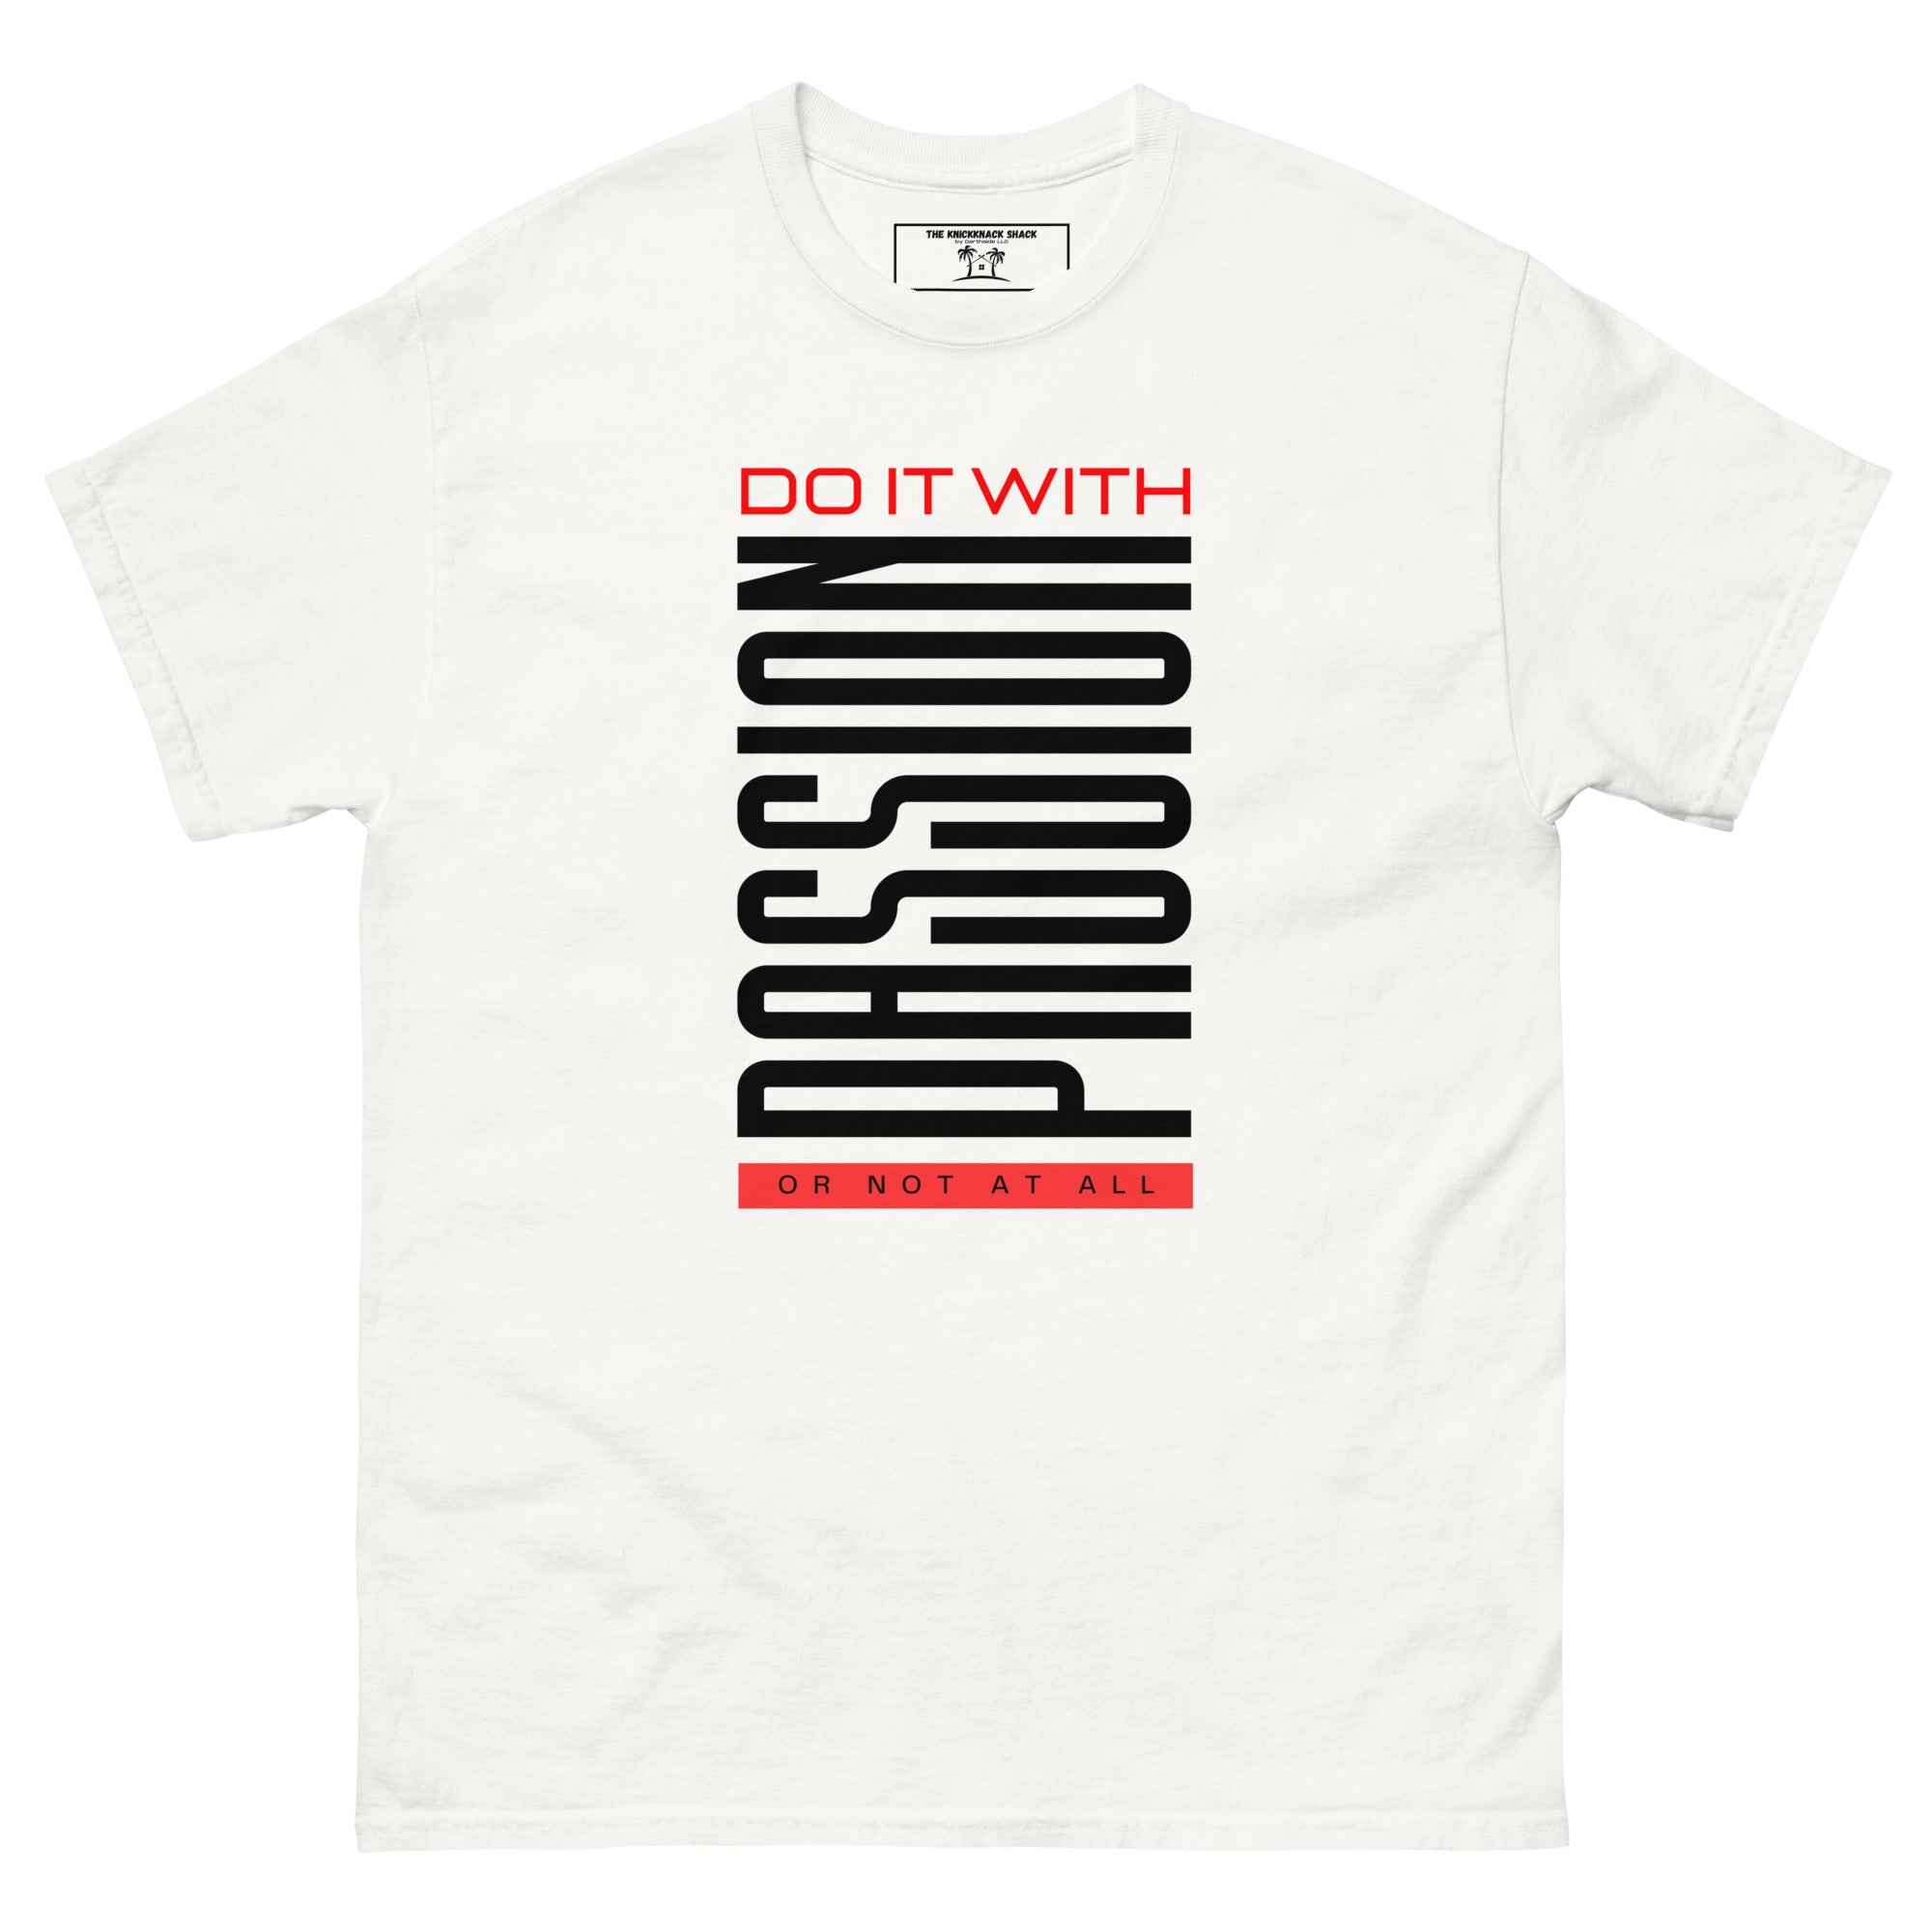 Classic Tee - Do It With Passion (Light Colors)